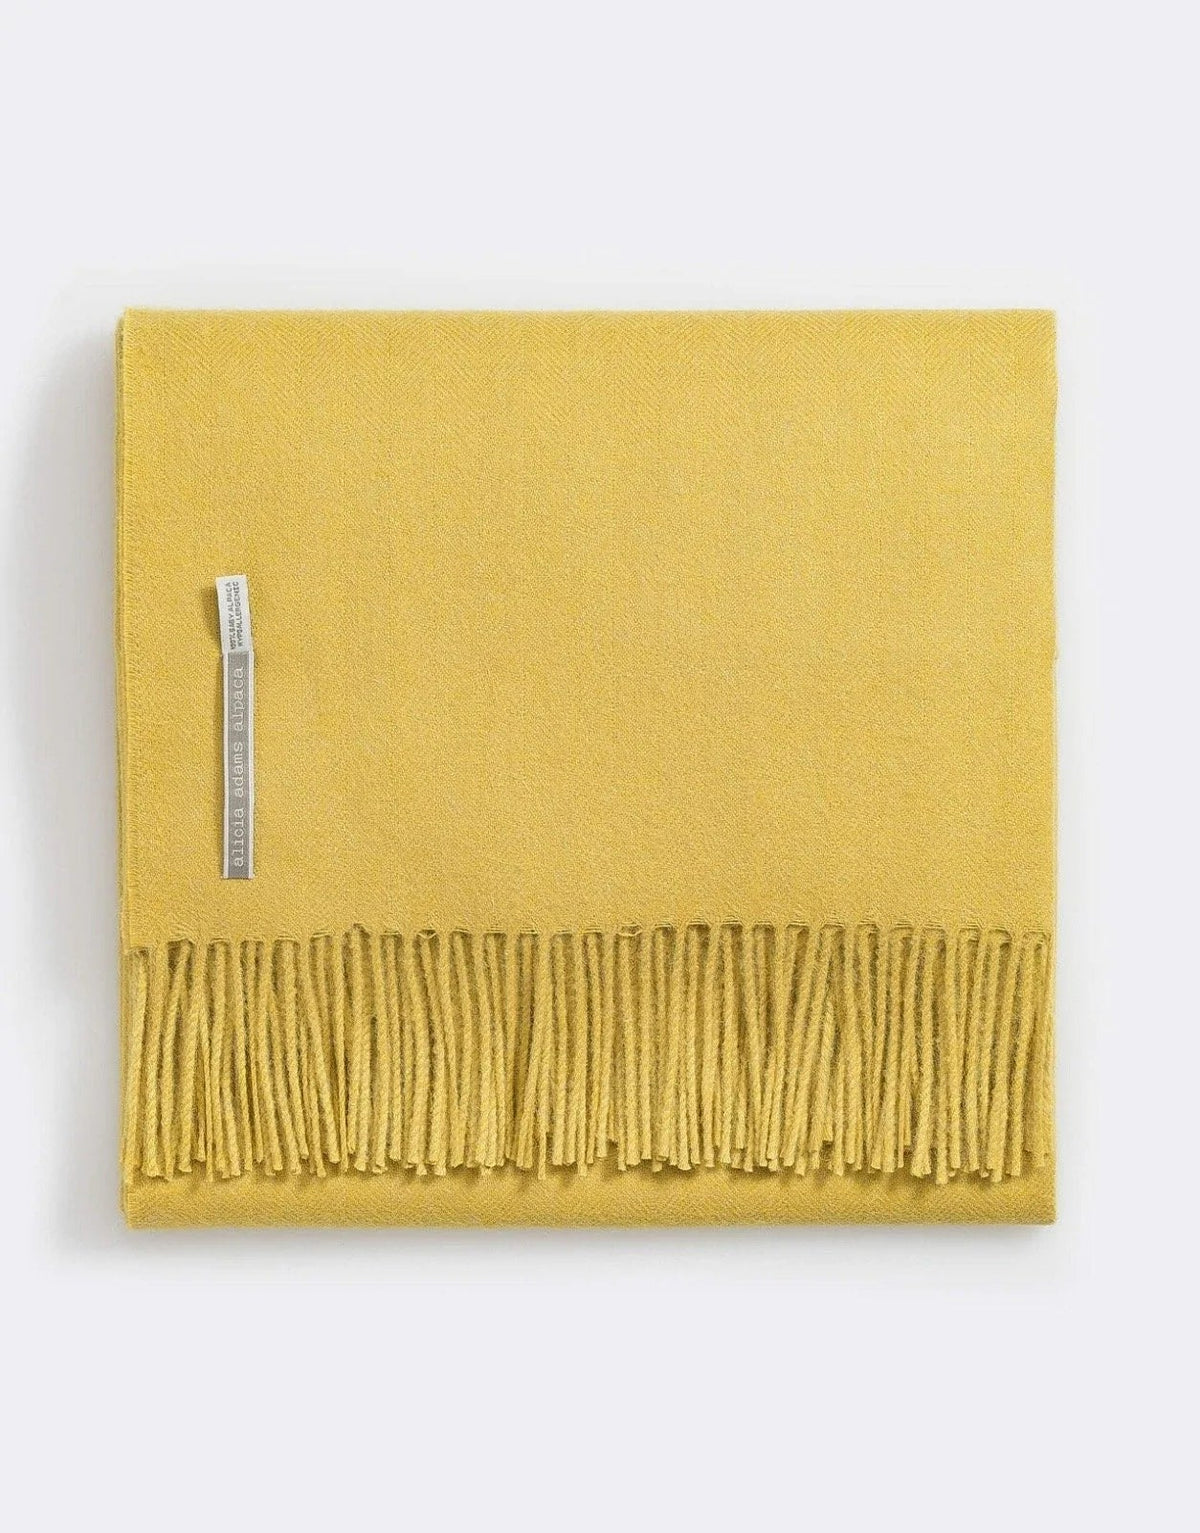 Alicia Adams Alpaca Throw in French Yellow Solid